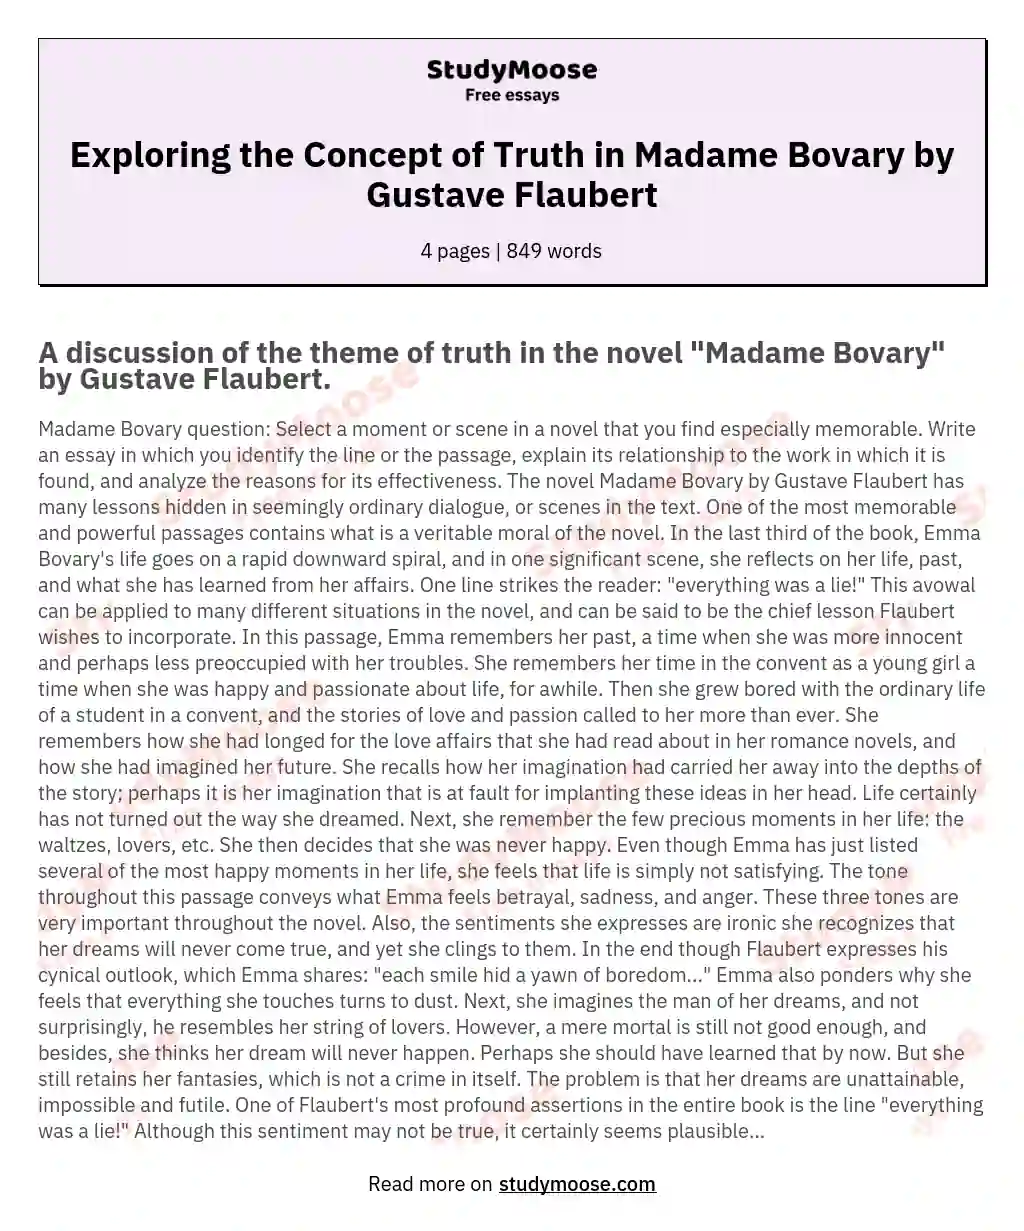 Exploring the Concept of Truth in Madame Bovary by Gustave Flaubert essay